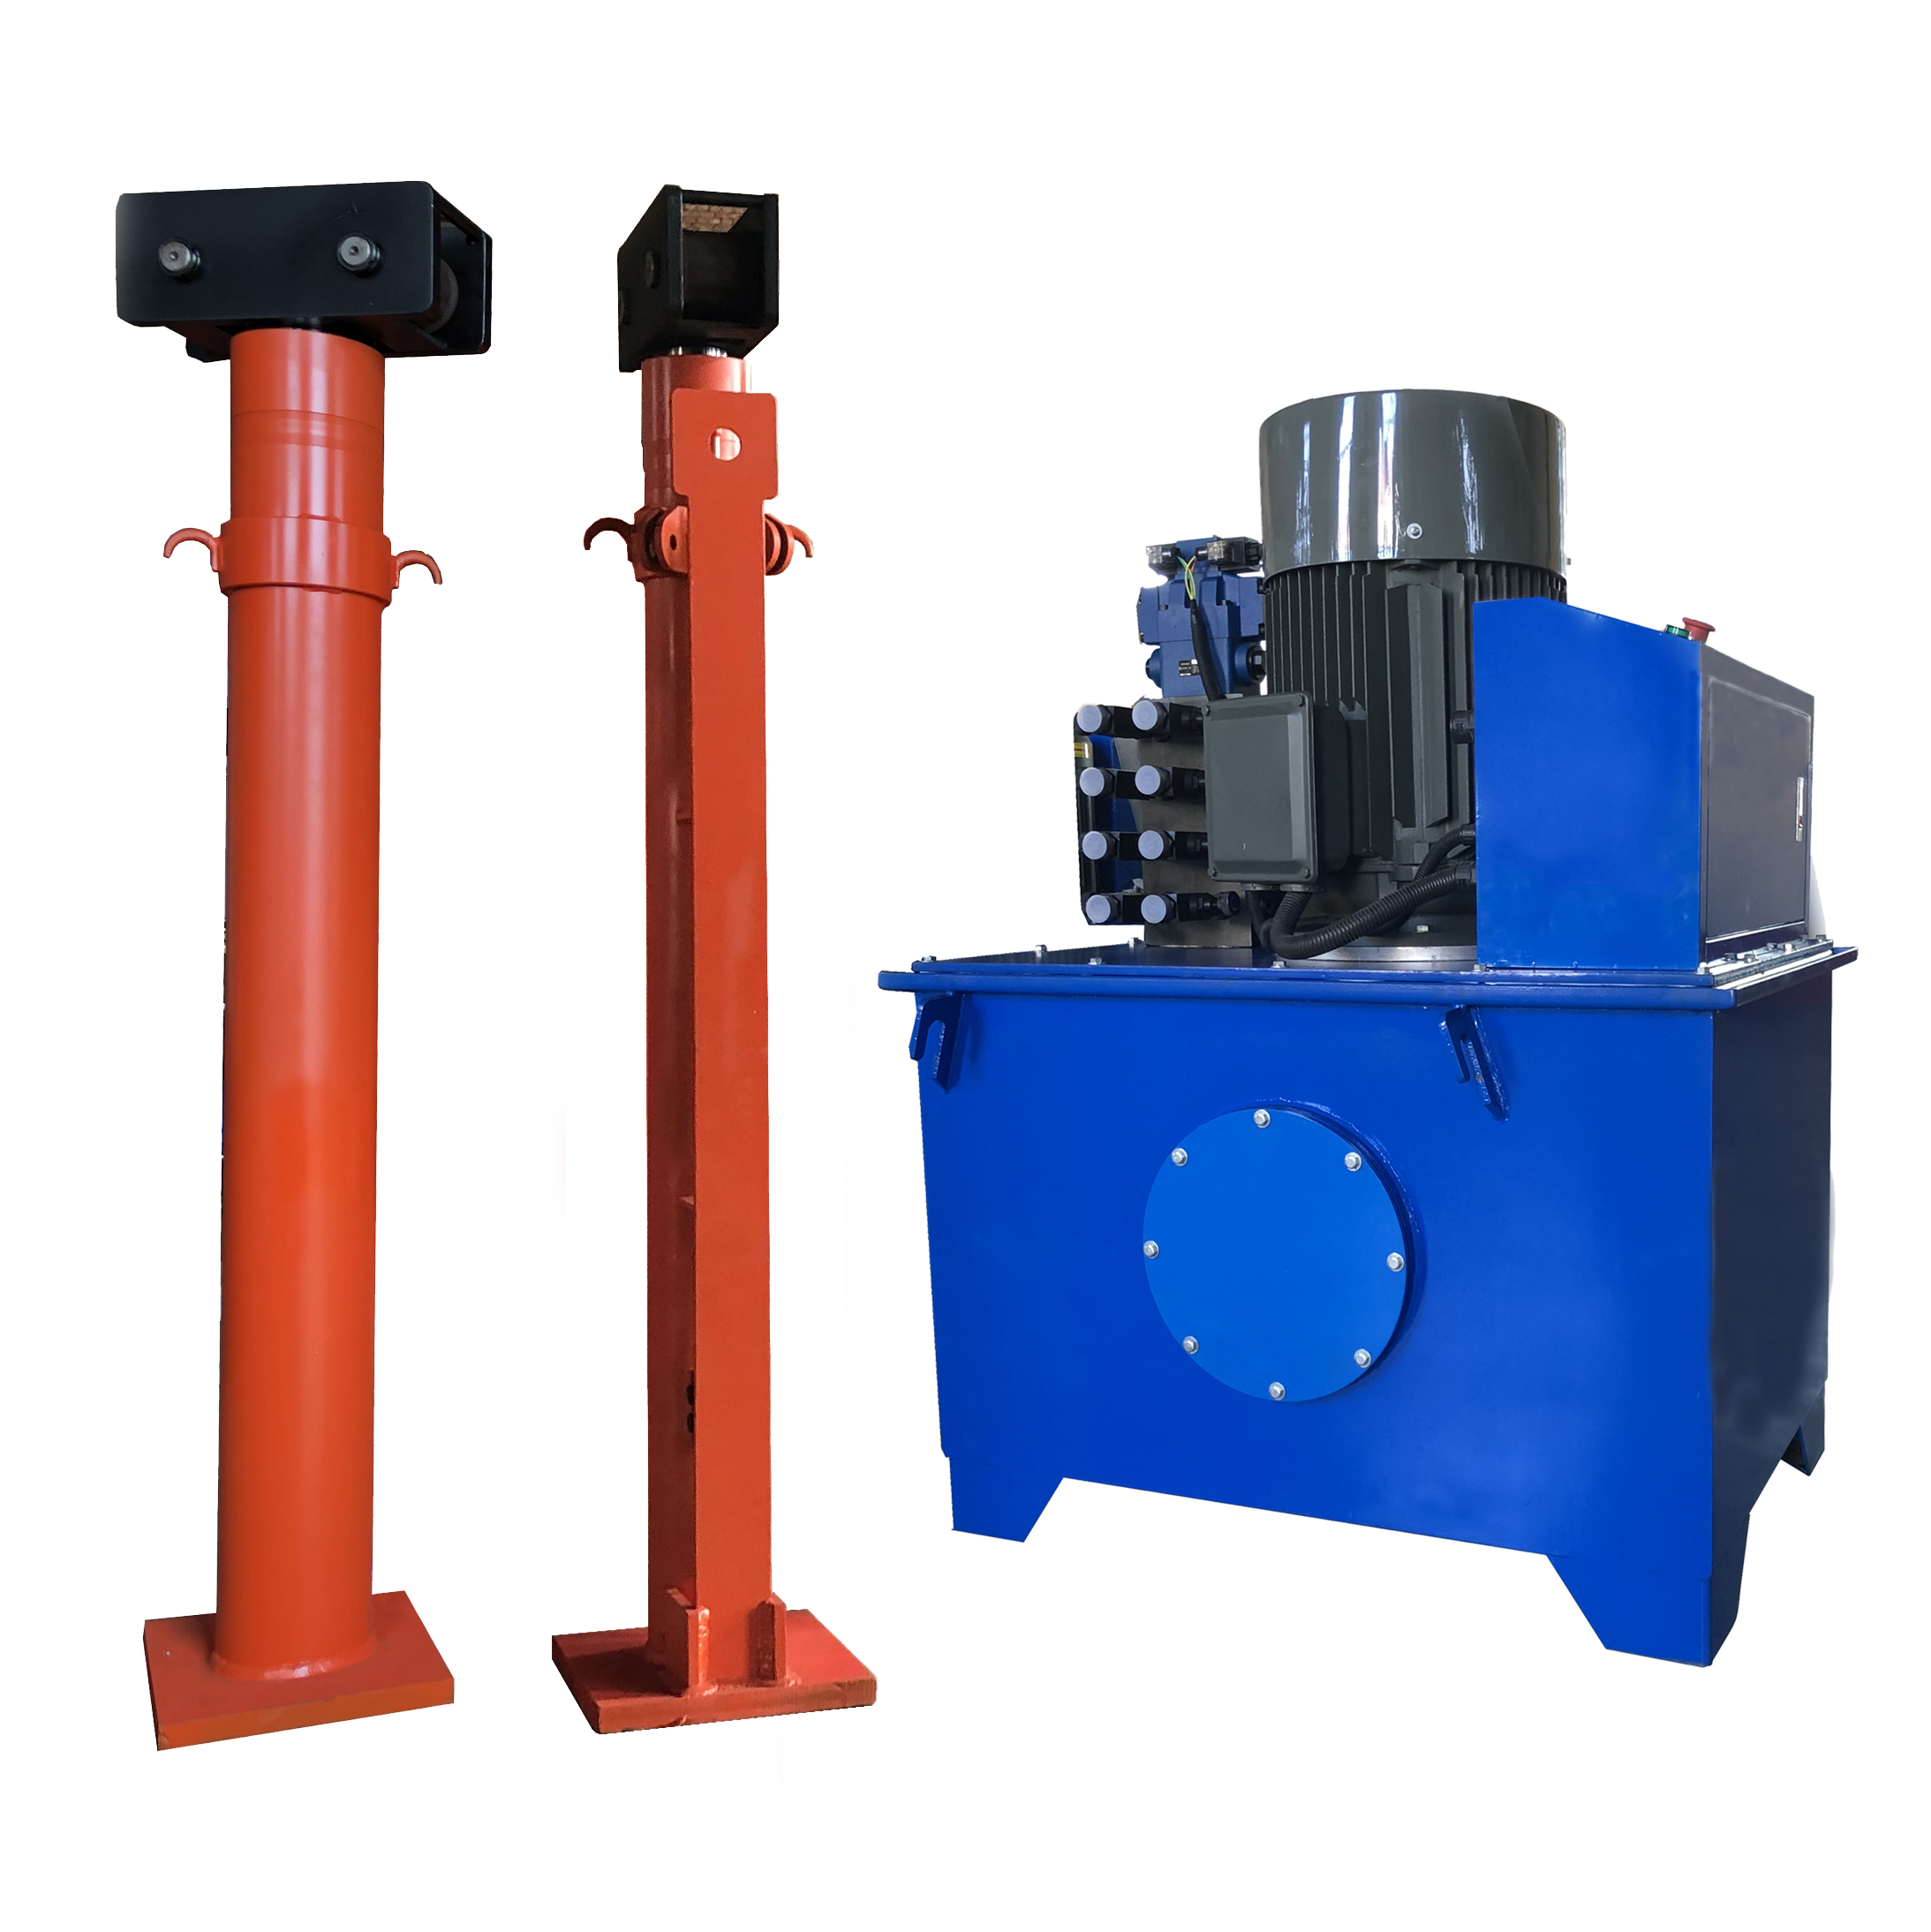 China Cheap Tank Hydraulic Lifter for Hydraulic Jacking System